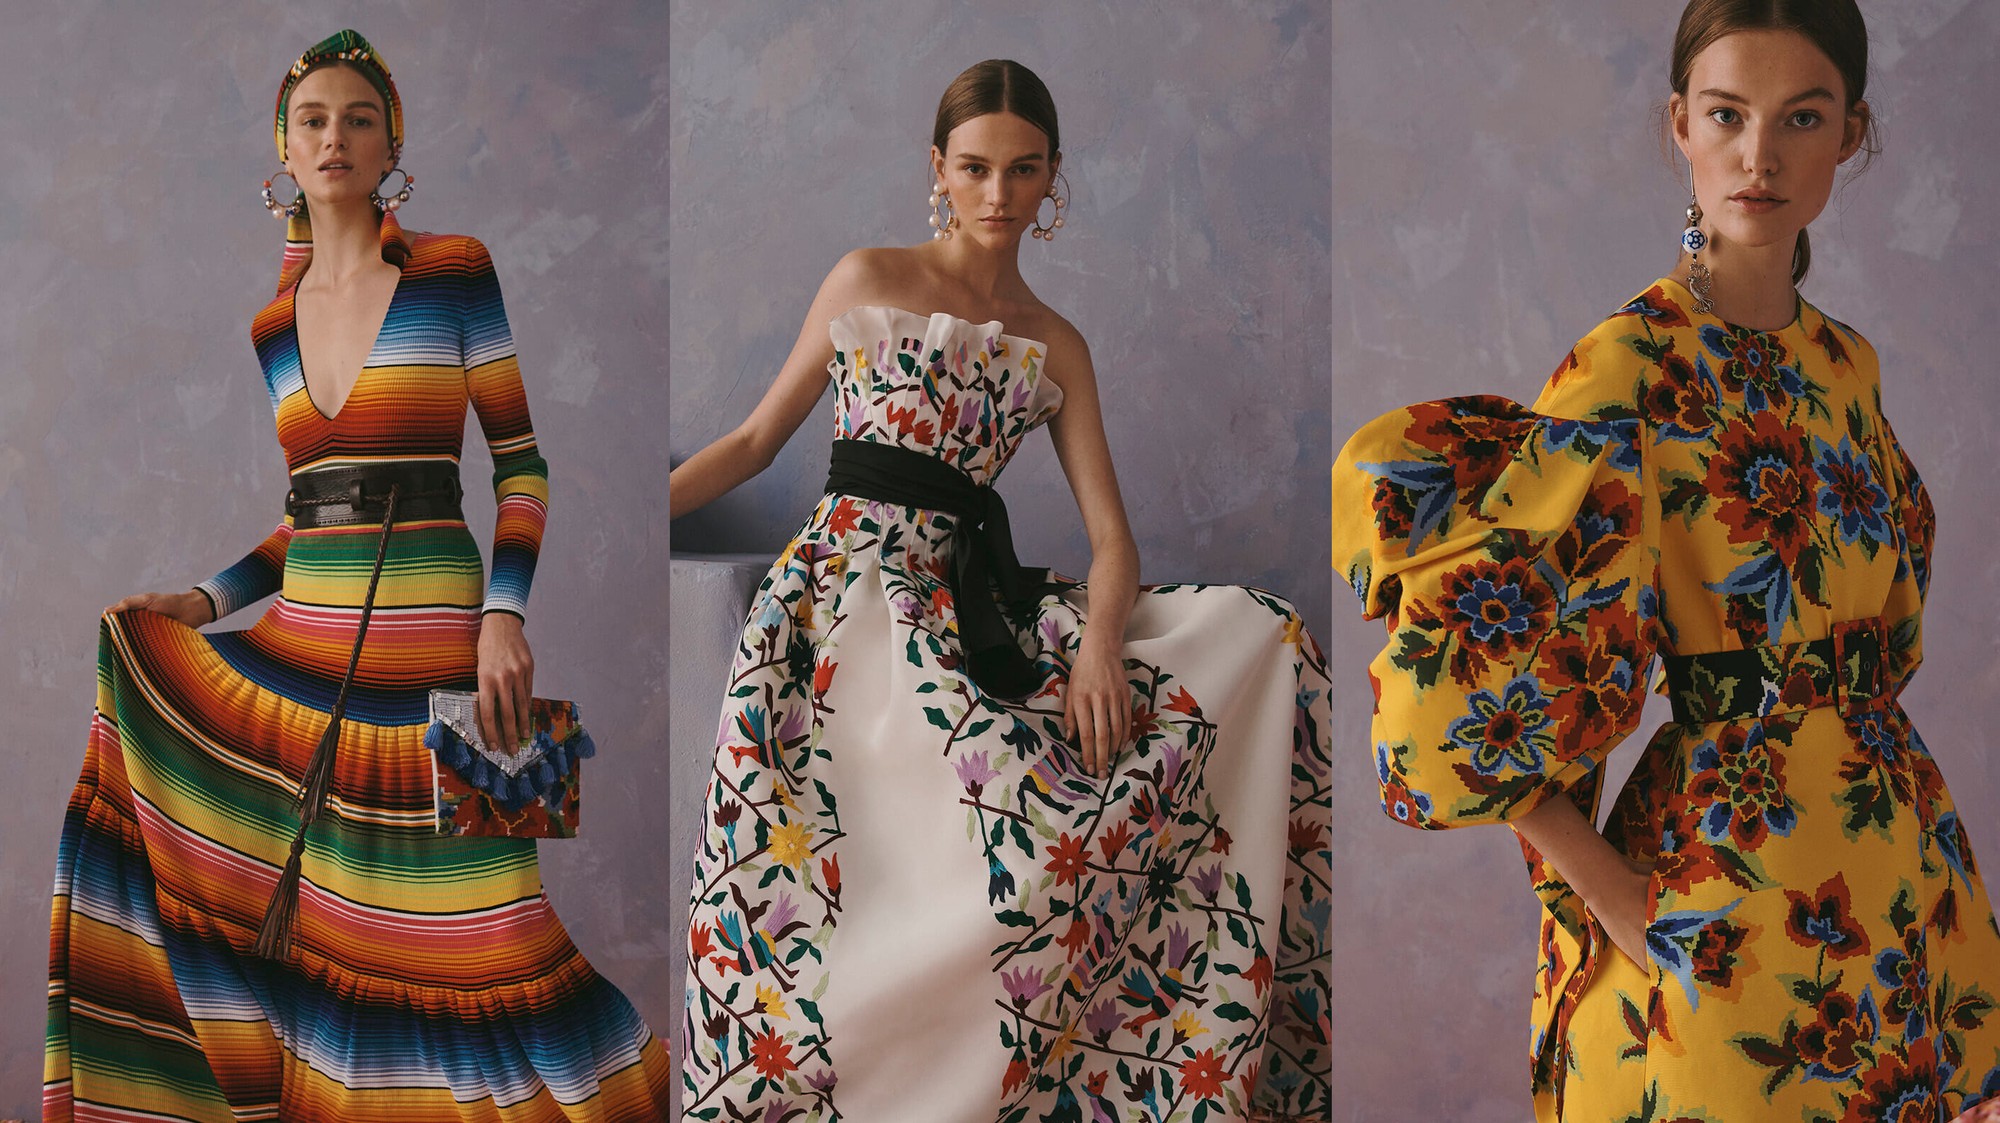 Carolina Herrera accused of cultural appropriation by the Mexican government - i-D